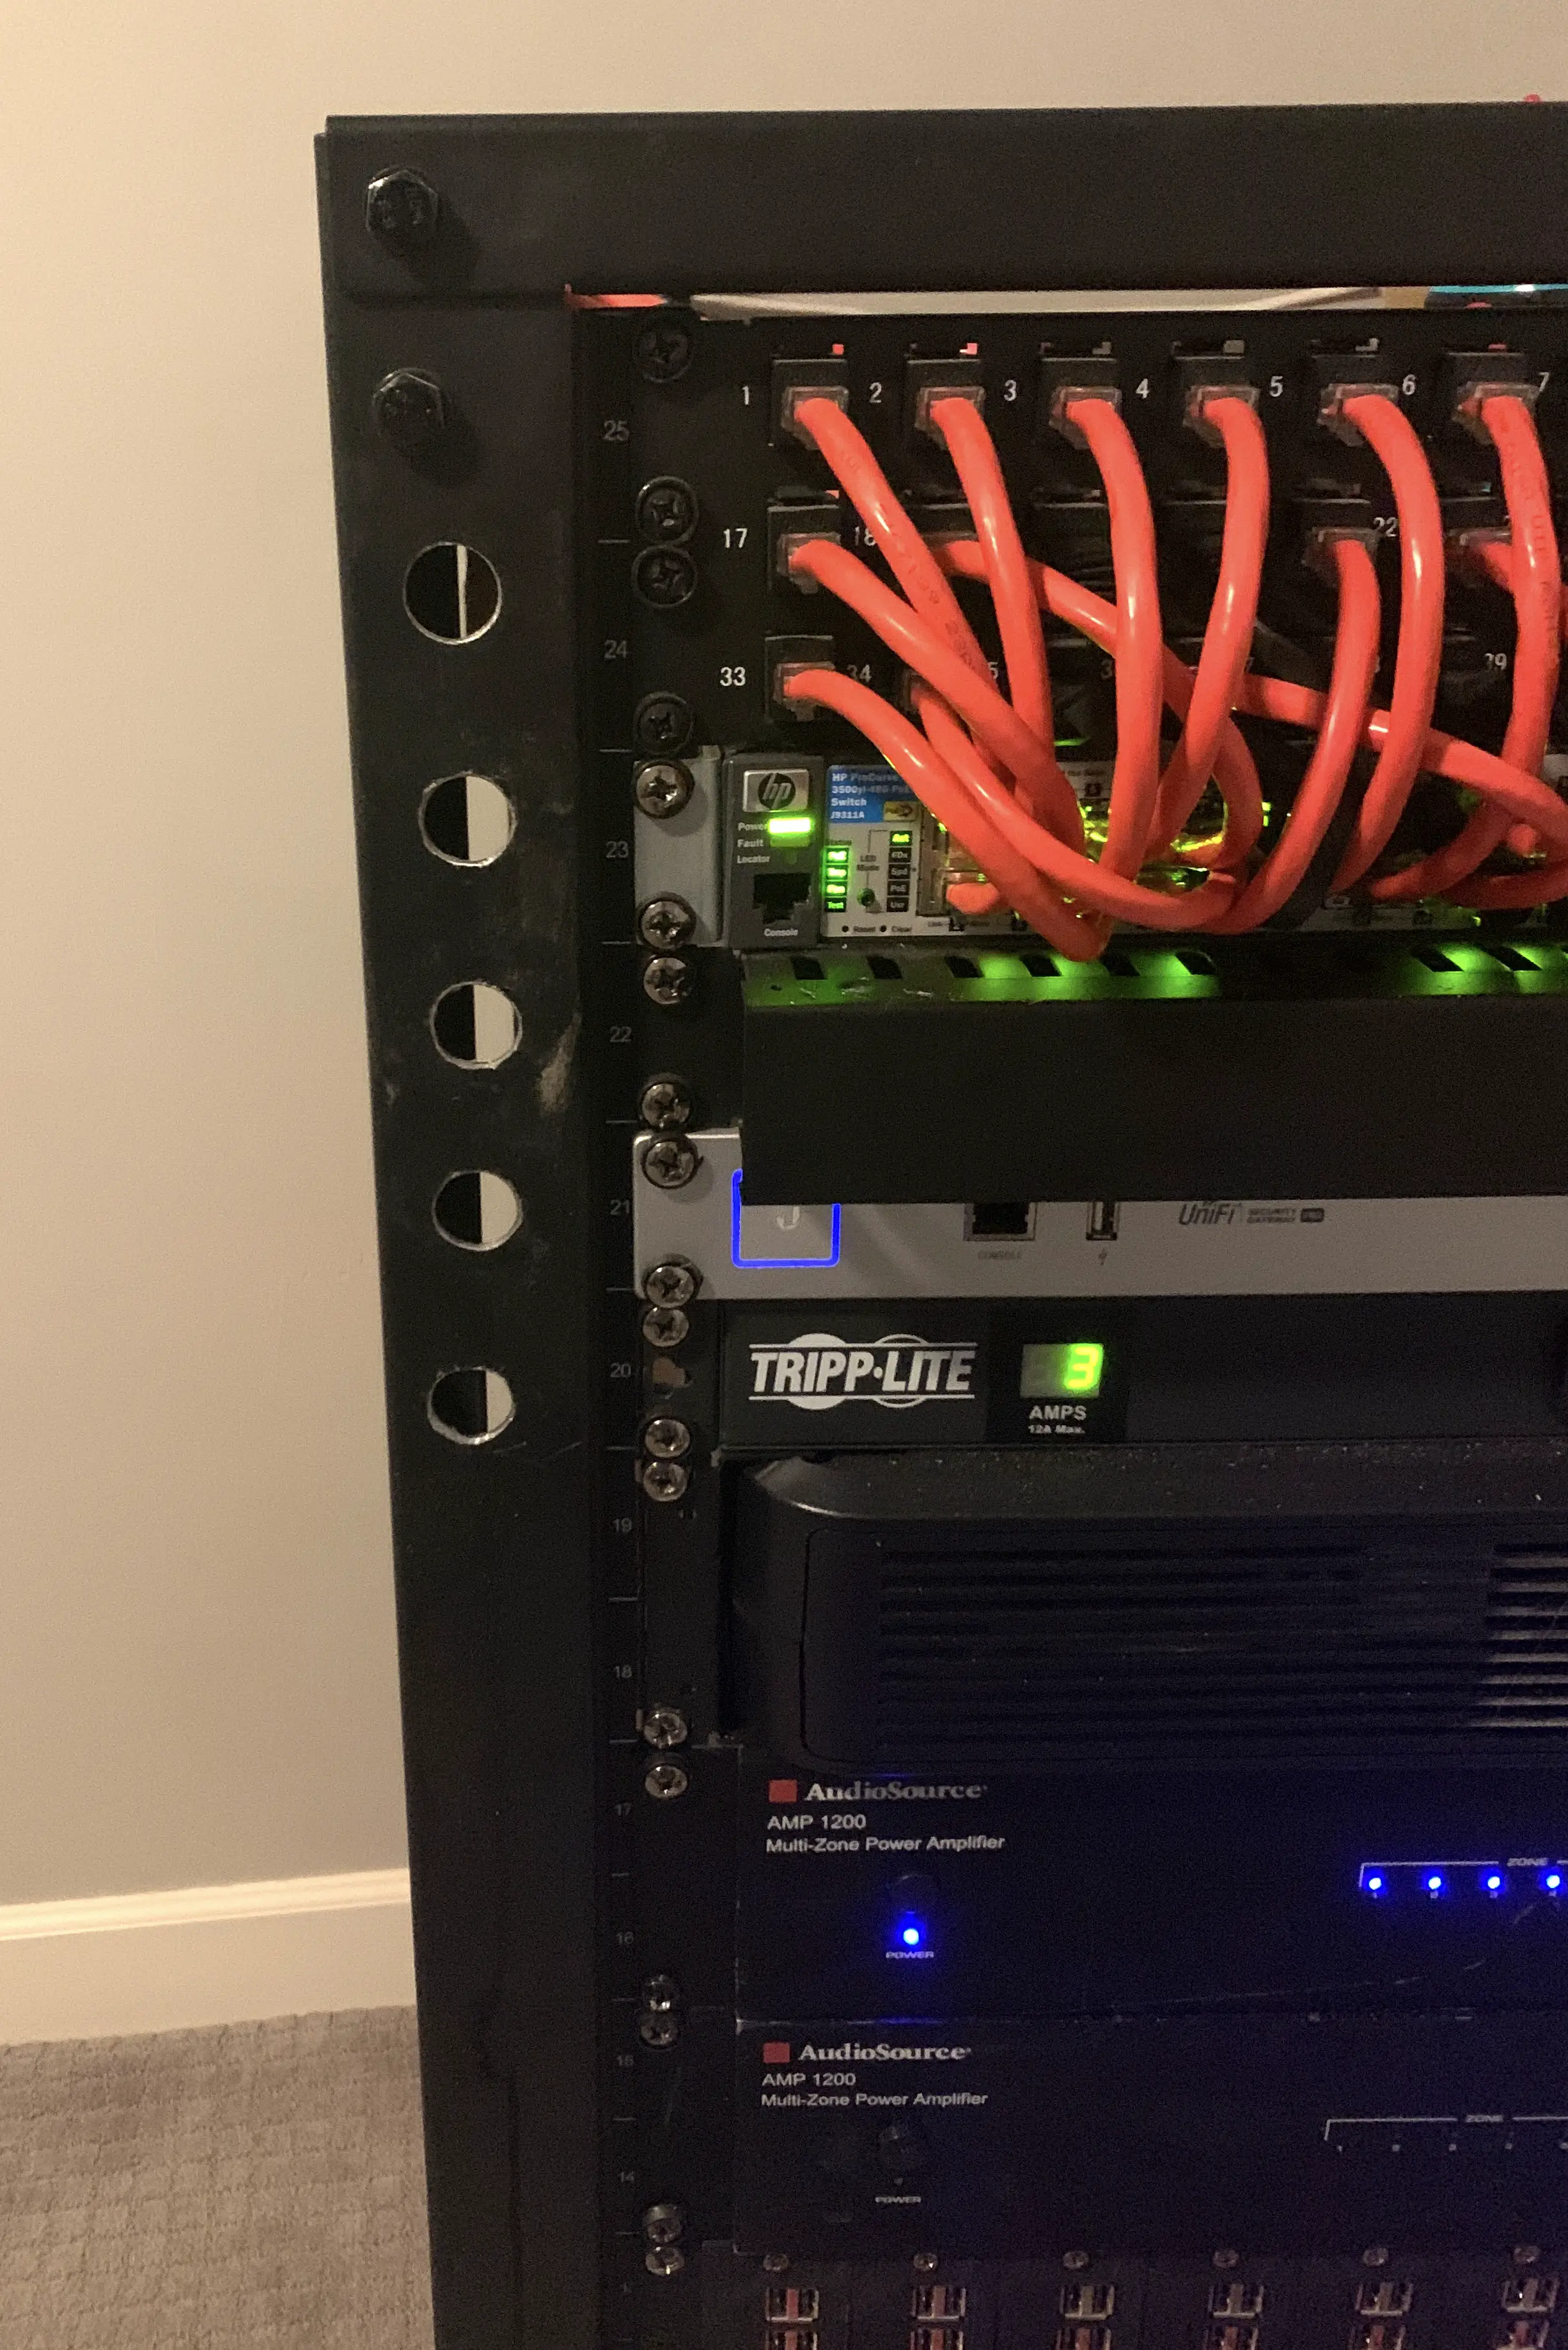 holes drilled in rack poorly